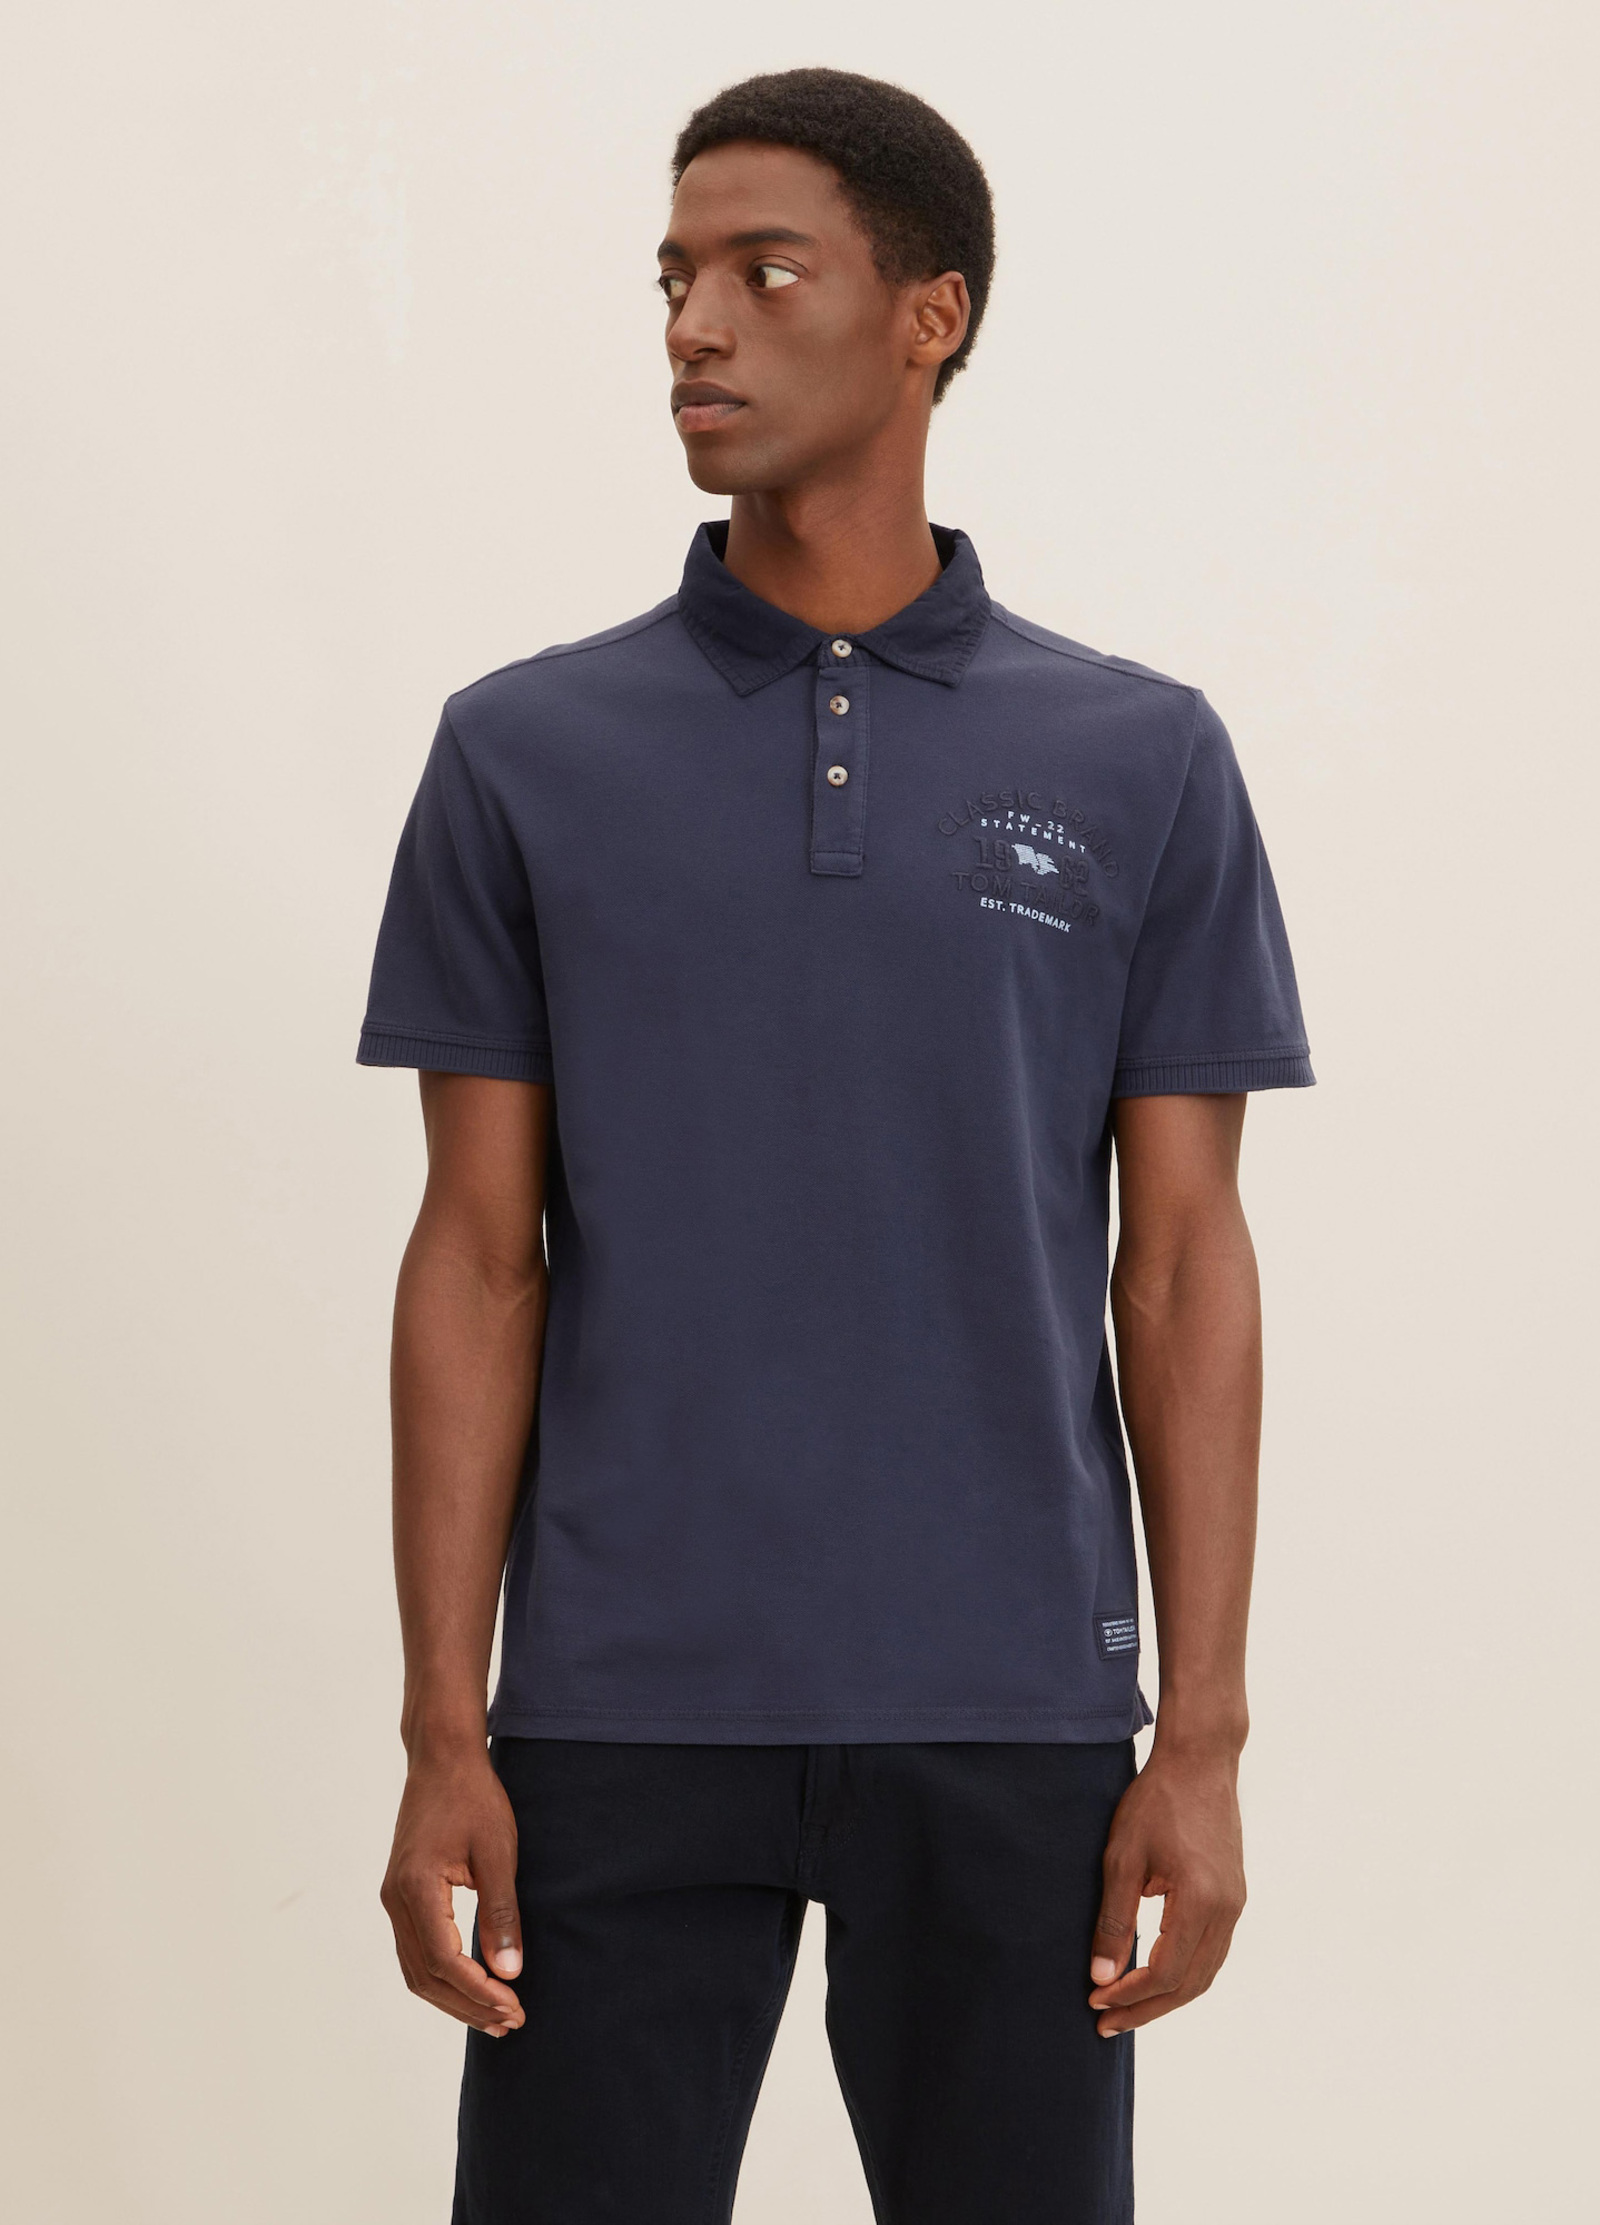 Tom Tailor® Polo Size Sky shirt - with logo Captain L Blue embroidery